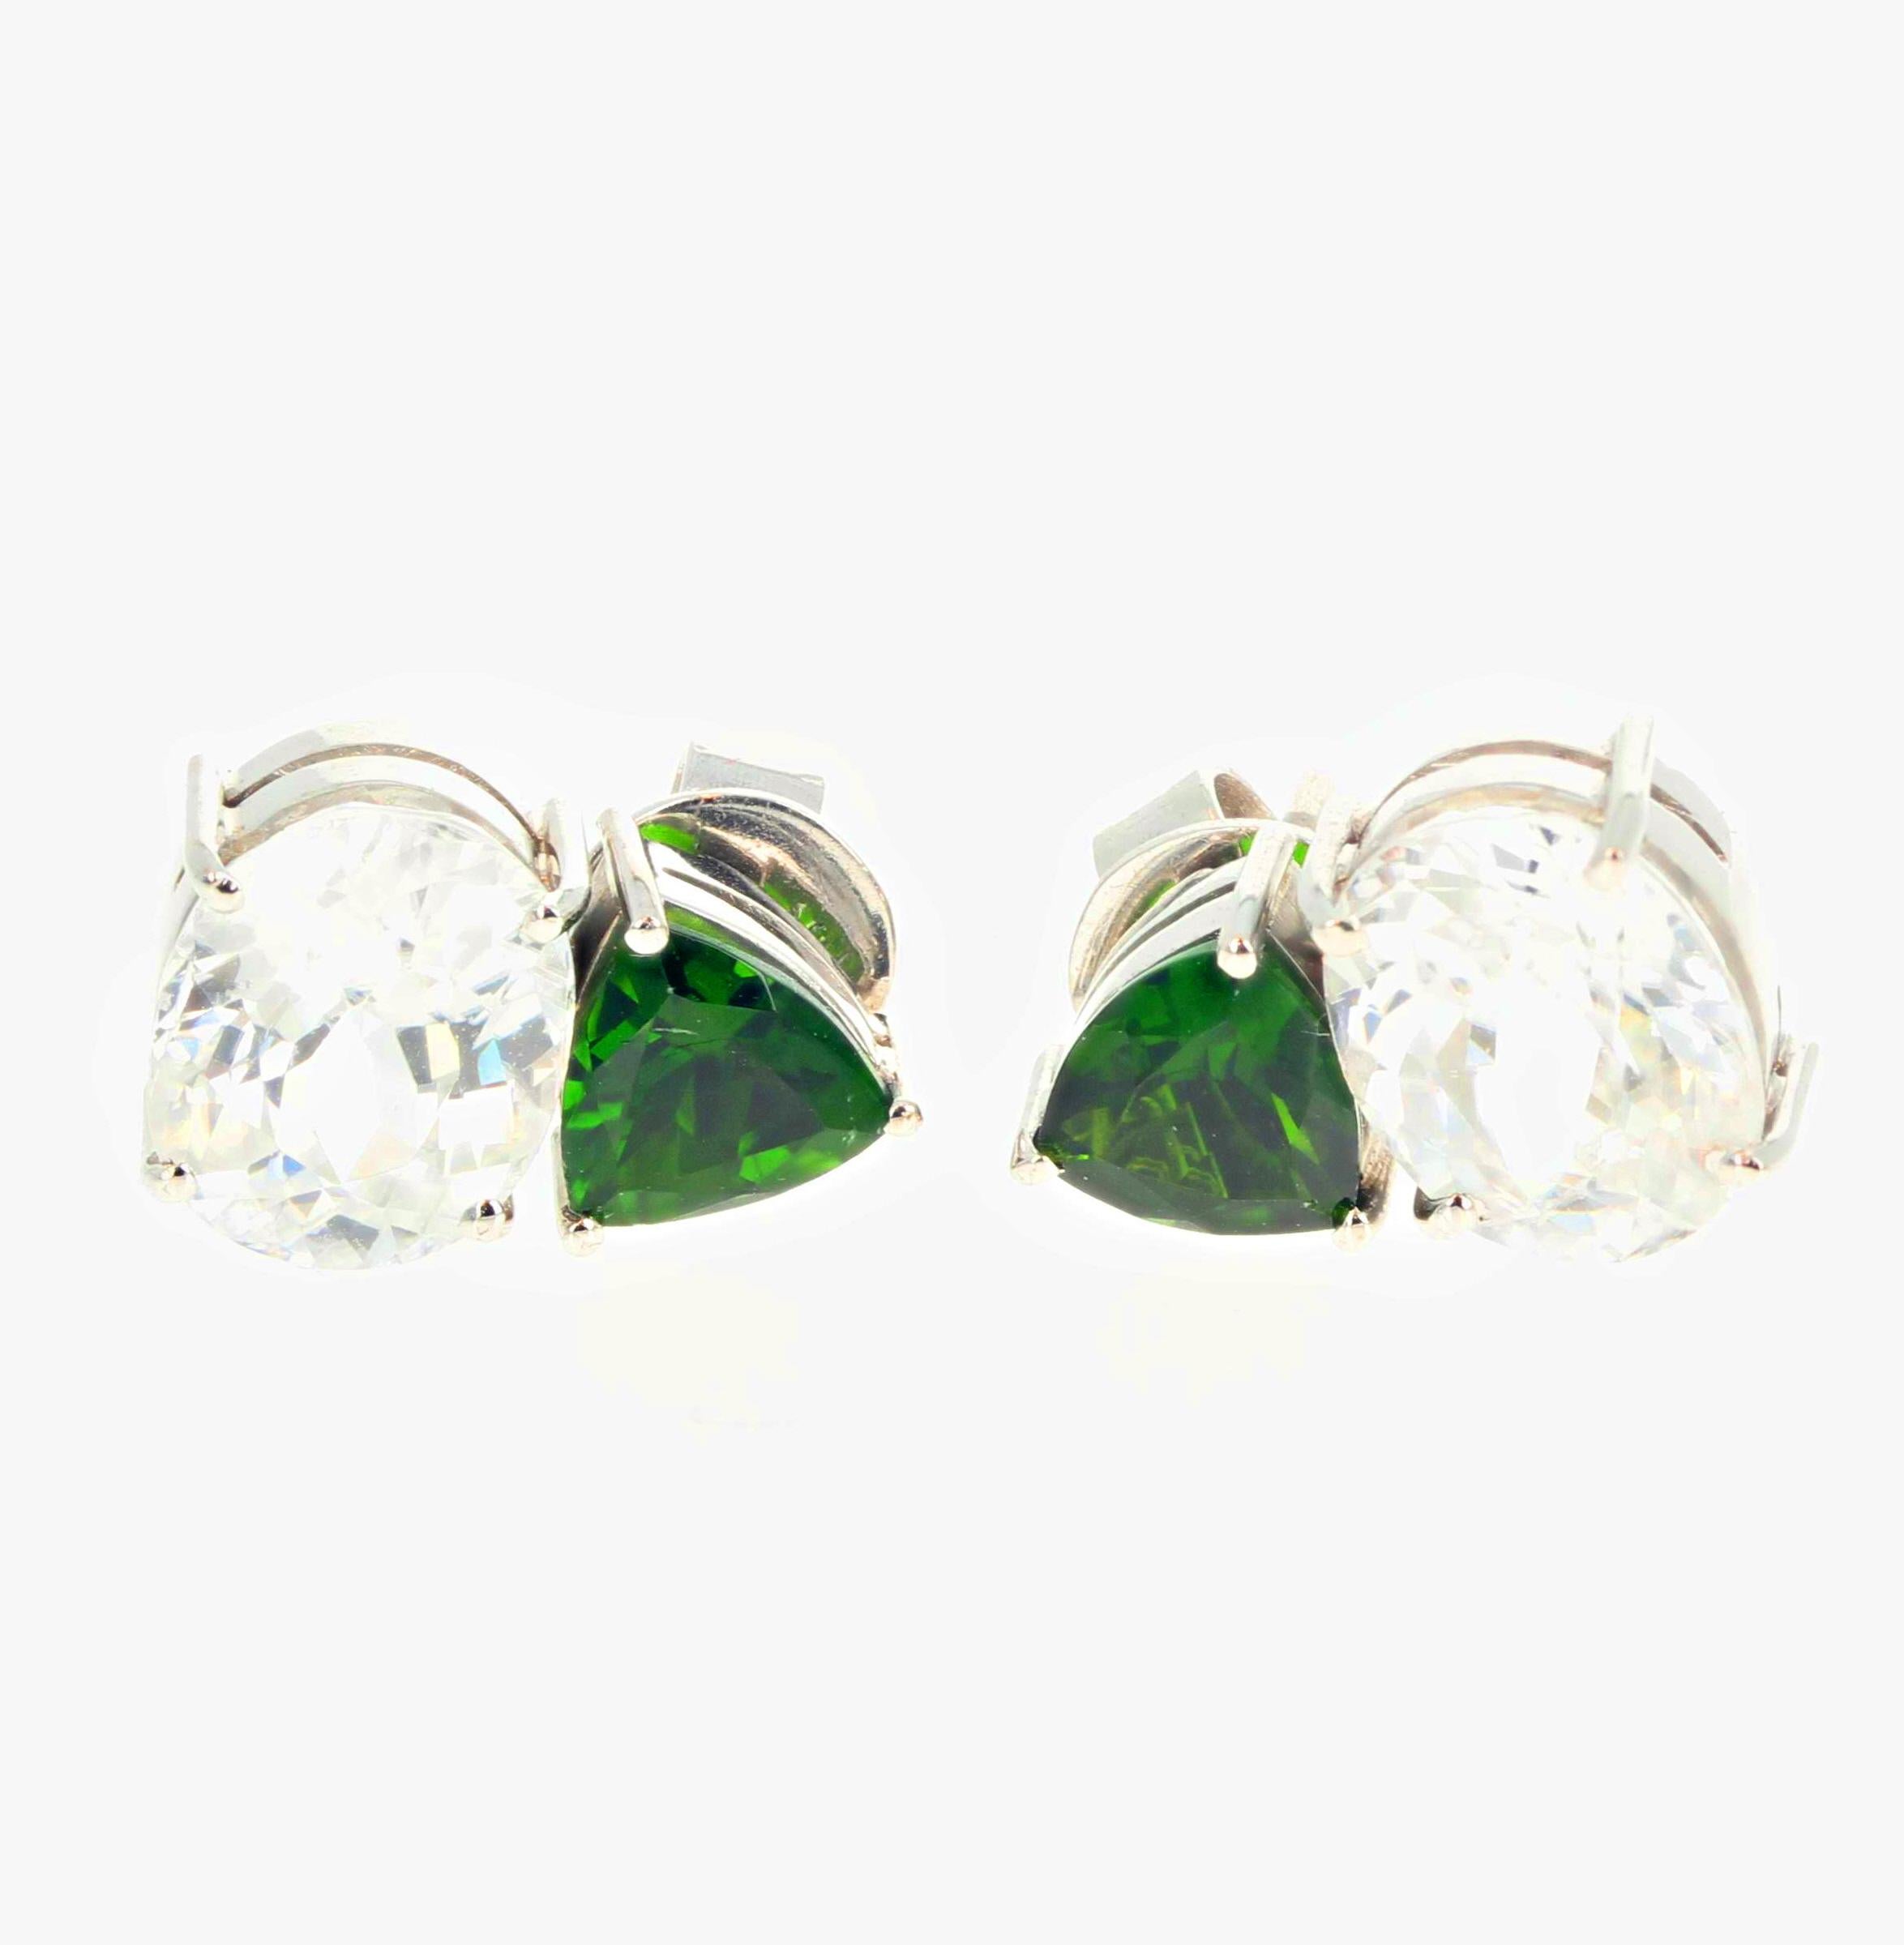 Mixed Cut AJD GLITTERING Chrome Diopside & Natural Cambodian Zircons White Gold Earrings For Sale